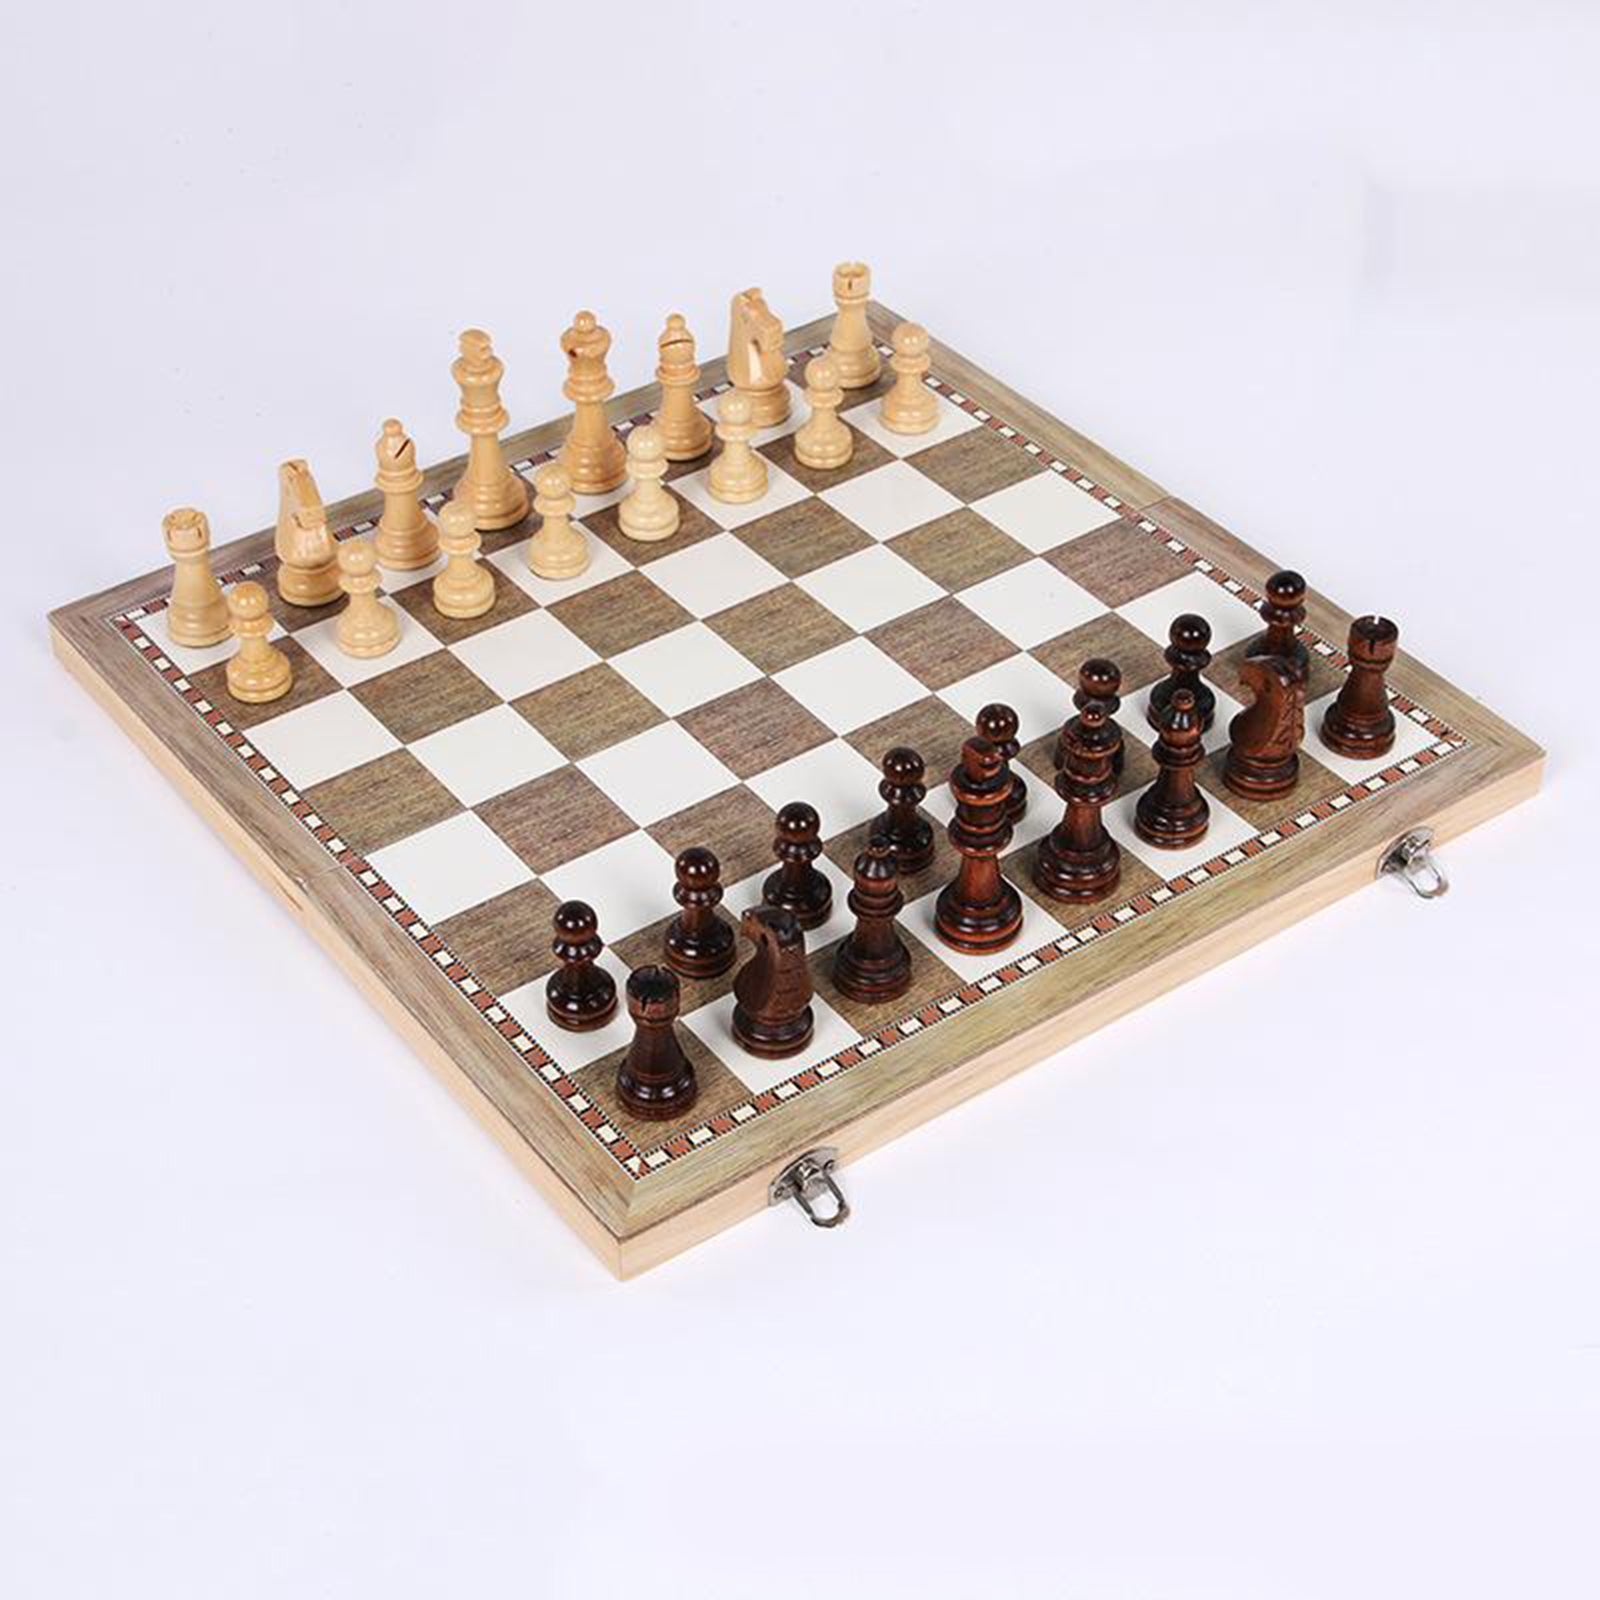 3-in-1 Wooden Folding Chess Board Game Travel Set for Kids Teens Adults Gift